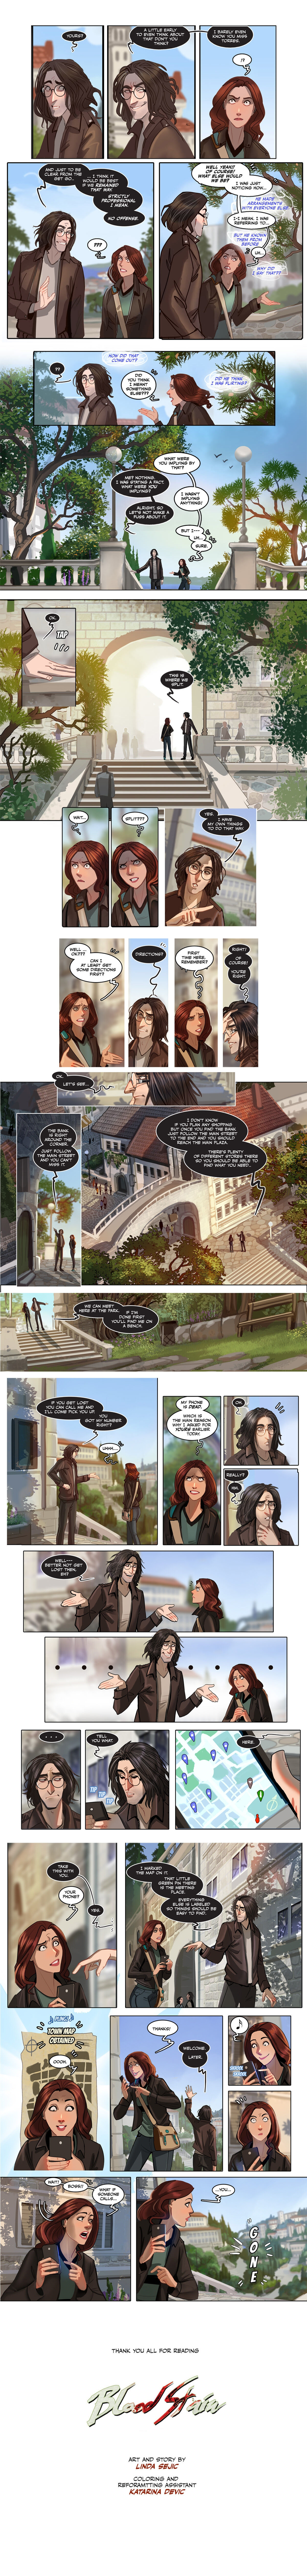 Blood Stain ch. 4 (ongoing) [Linda Sejic / Sigeel] 12